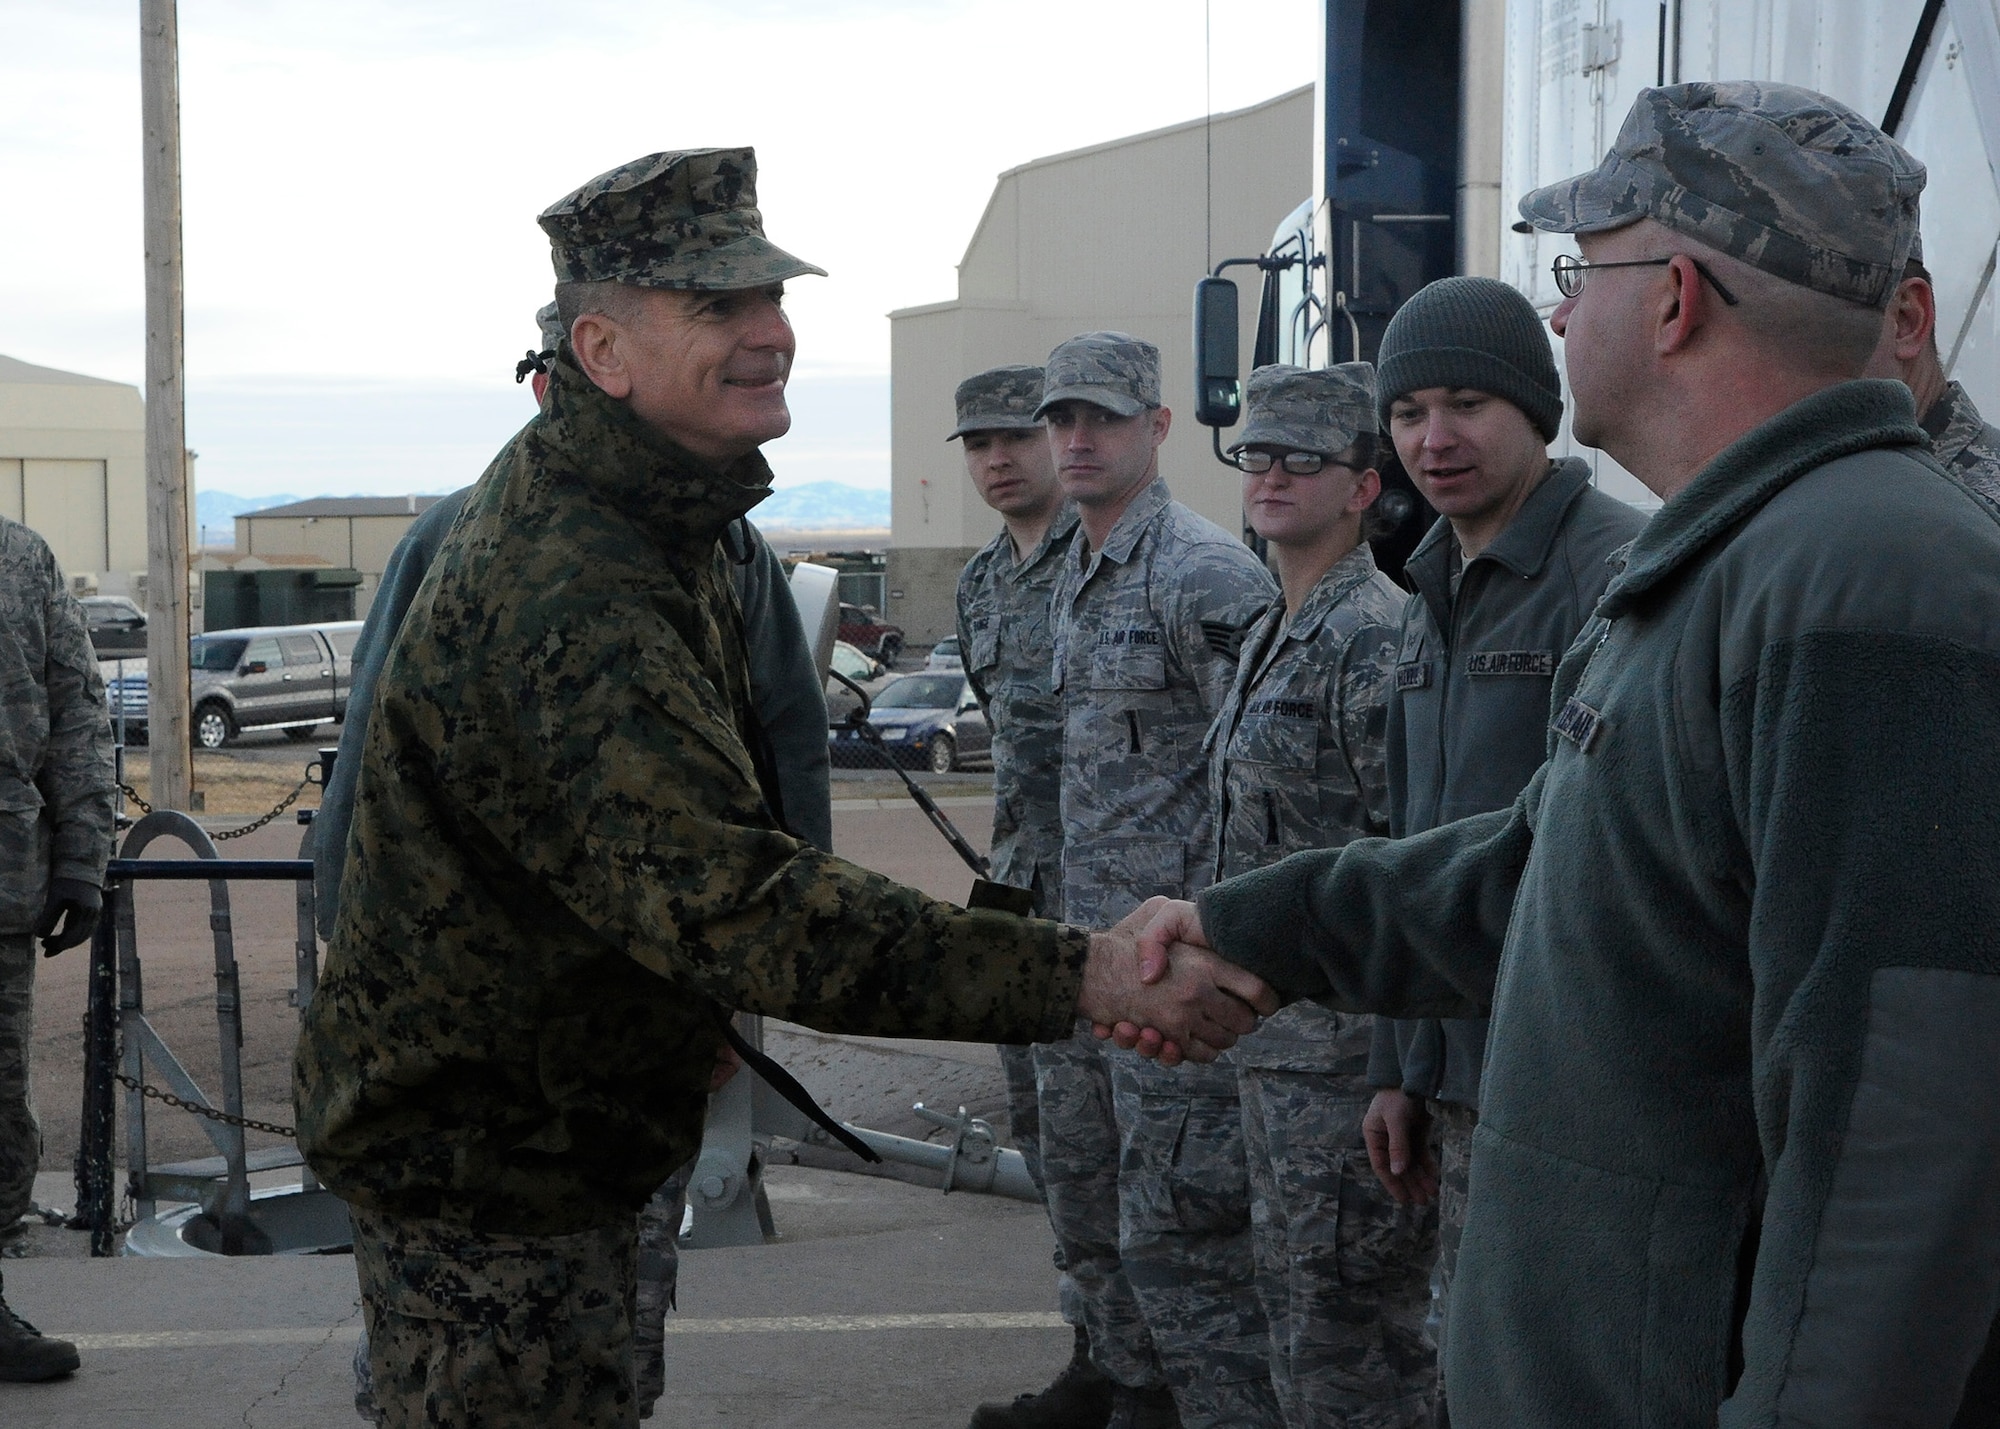 Sgt. Maj. Bryan Battaglia, Senior Enlisted Advisor to the Chairman of the Joint Chiefs of Staff, greets Airmen at the T-9 Maintenance Trainer at Malmstrom Air Force Base on Jan. 17. Battaglia visited the trainer to better understand daily operations of maintenance personnel at a launch facility and hear their opinion of what could be done to help them complete their mission in the field. (U.S. Air Force photo/Airman 1st Class Collin Schmidt)

